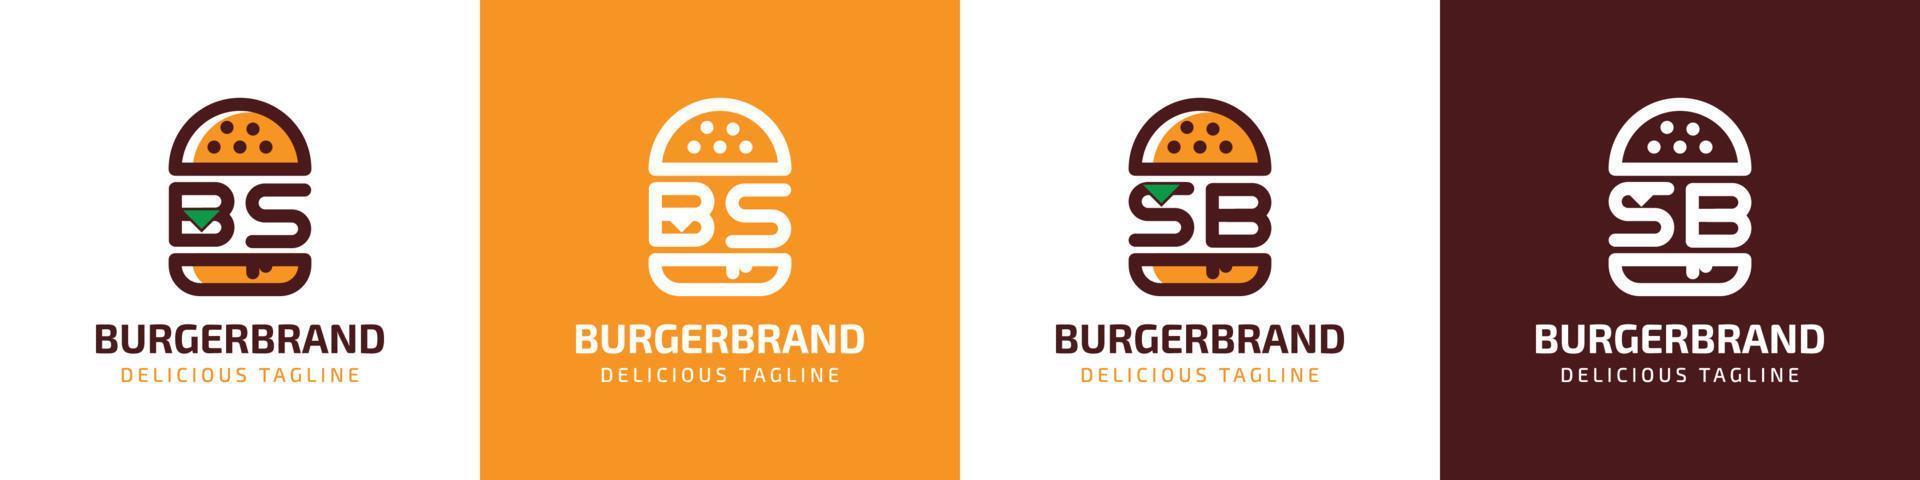 Letter BS and SB Burger Logo, suitable for any business related to burger with BS or SB initials. vector